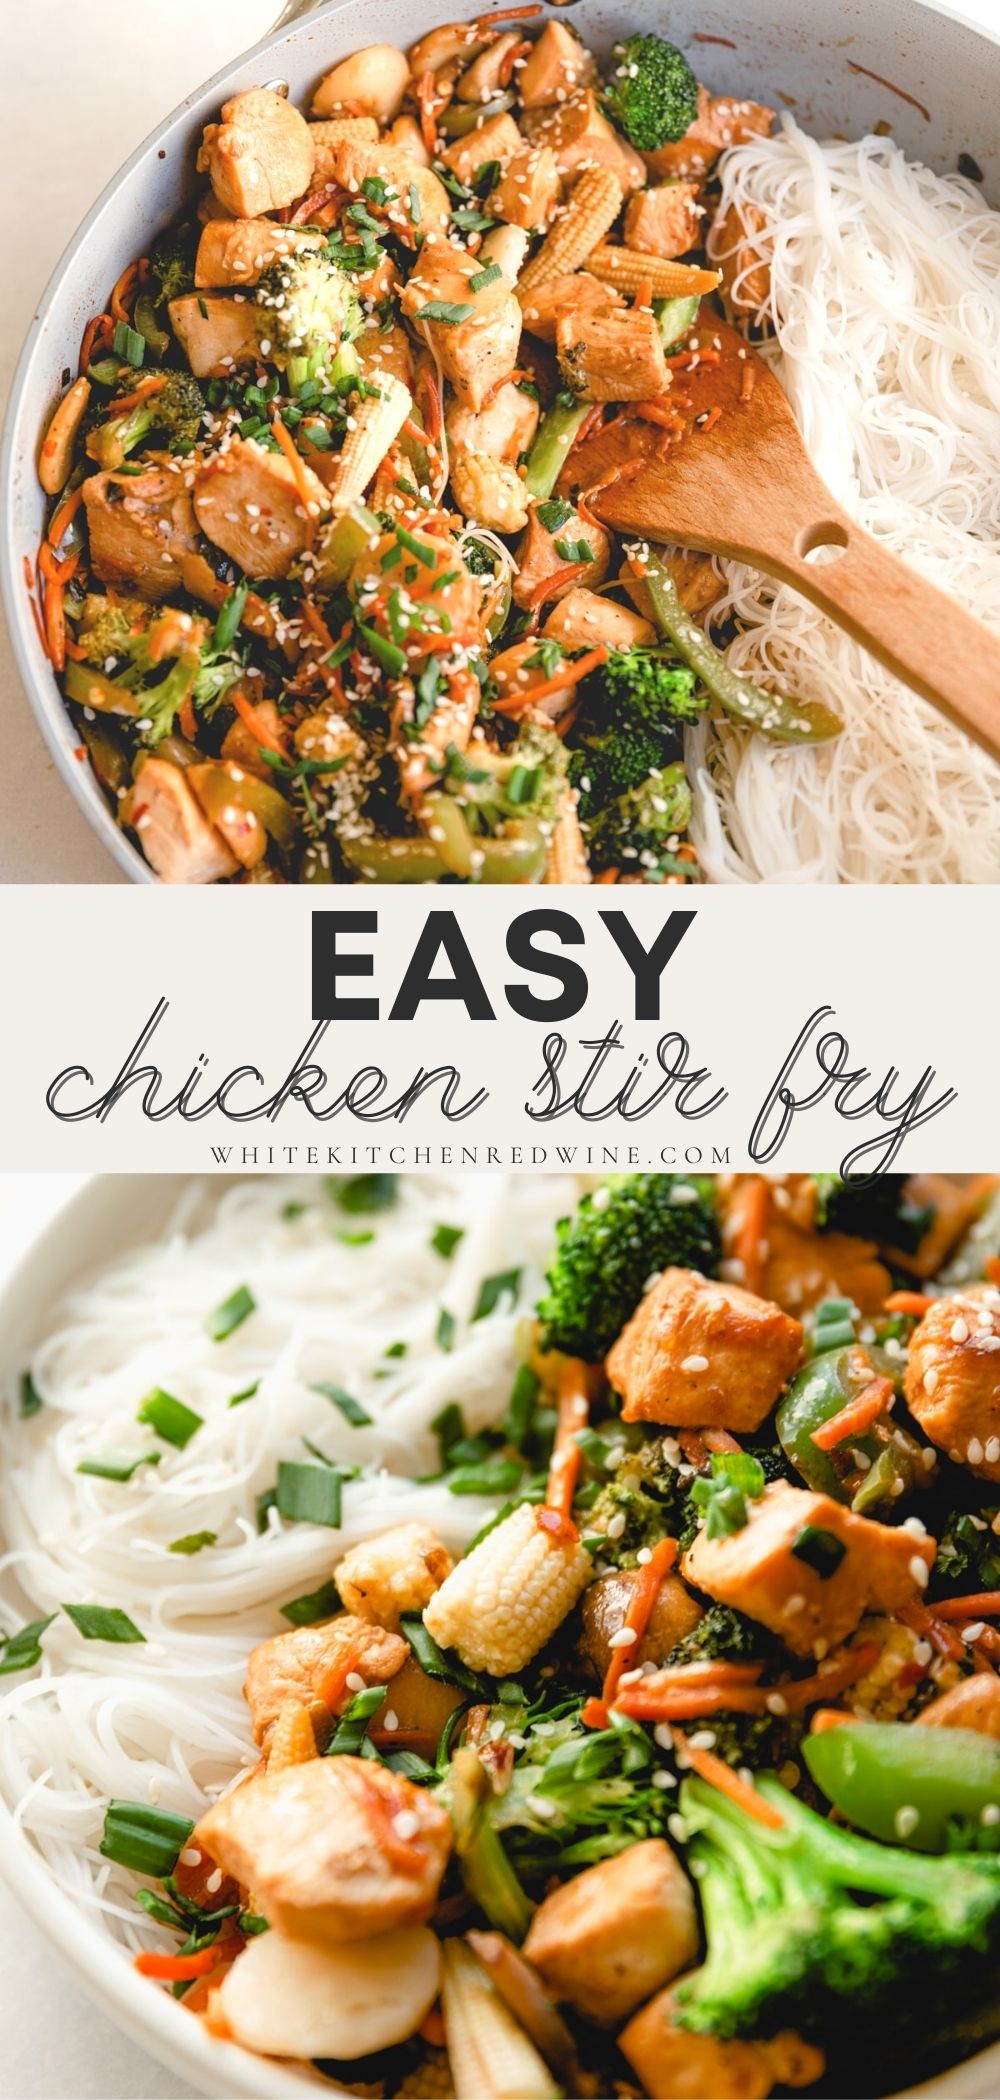 Healthy Honey-Soy Stir Fry Marinated Chicken with Veggies